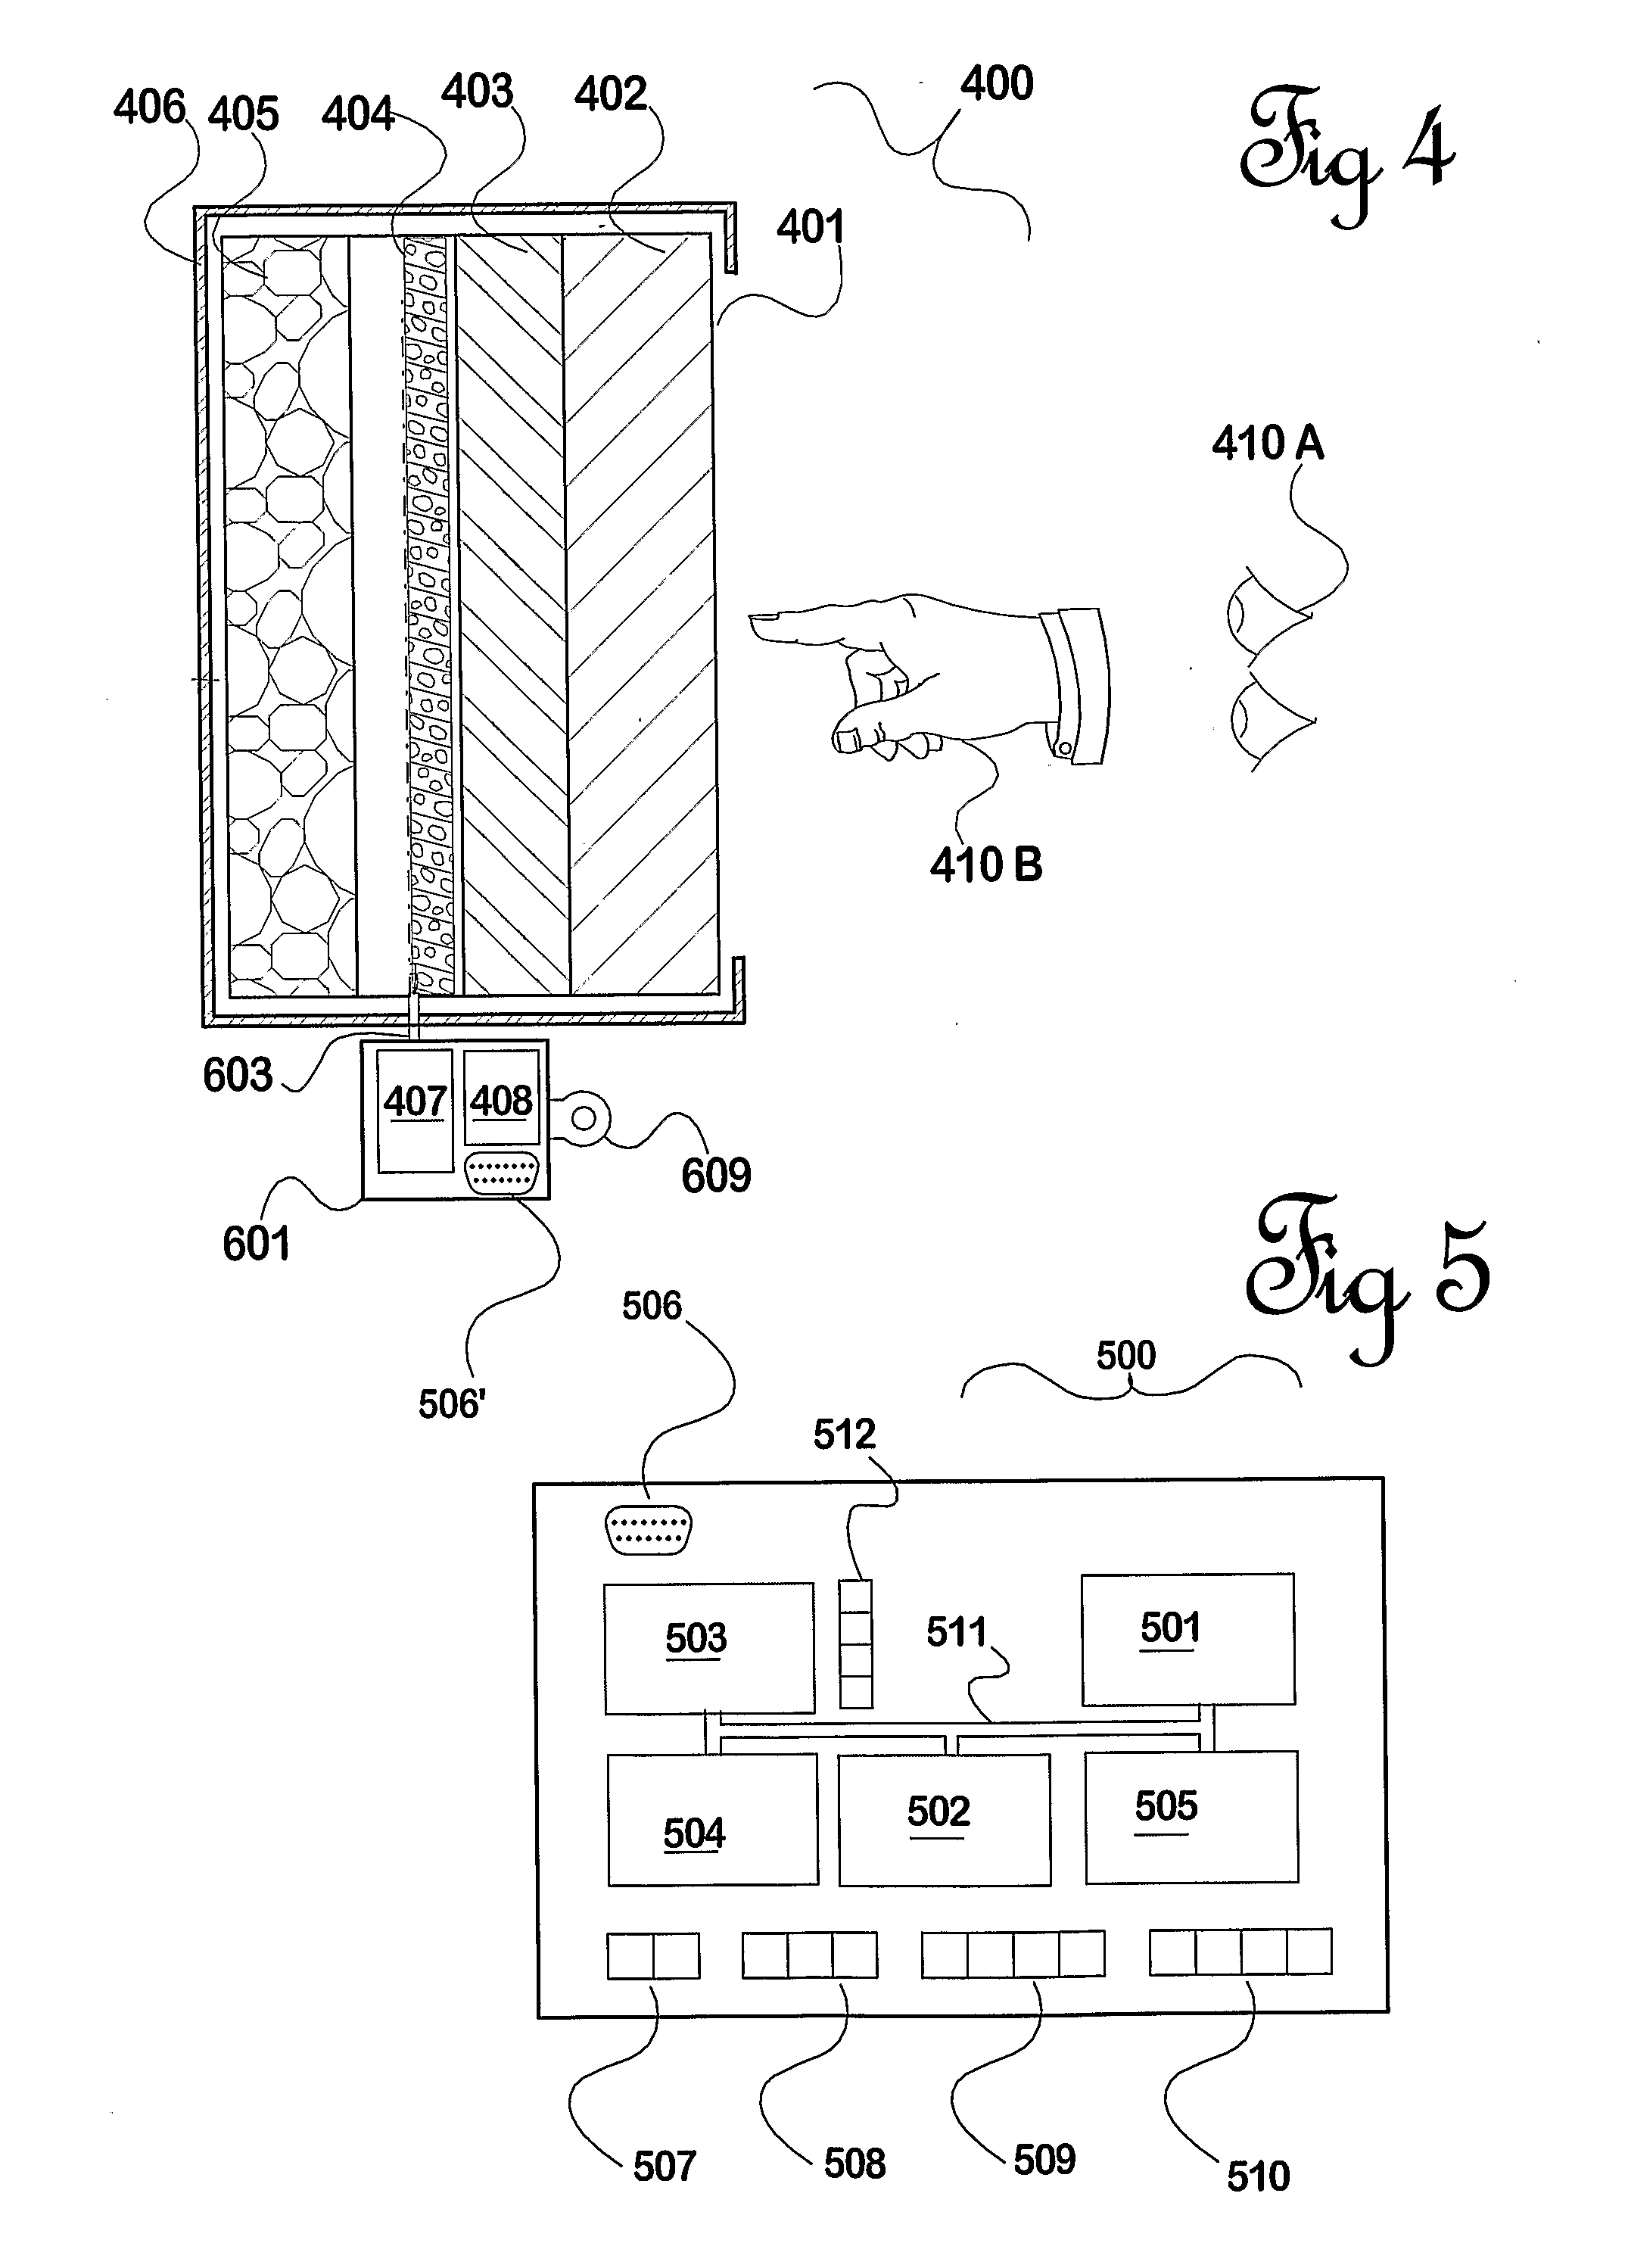 Apparatus and Method for Proximity-Responsive Display Materials